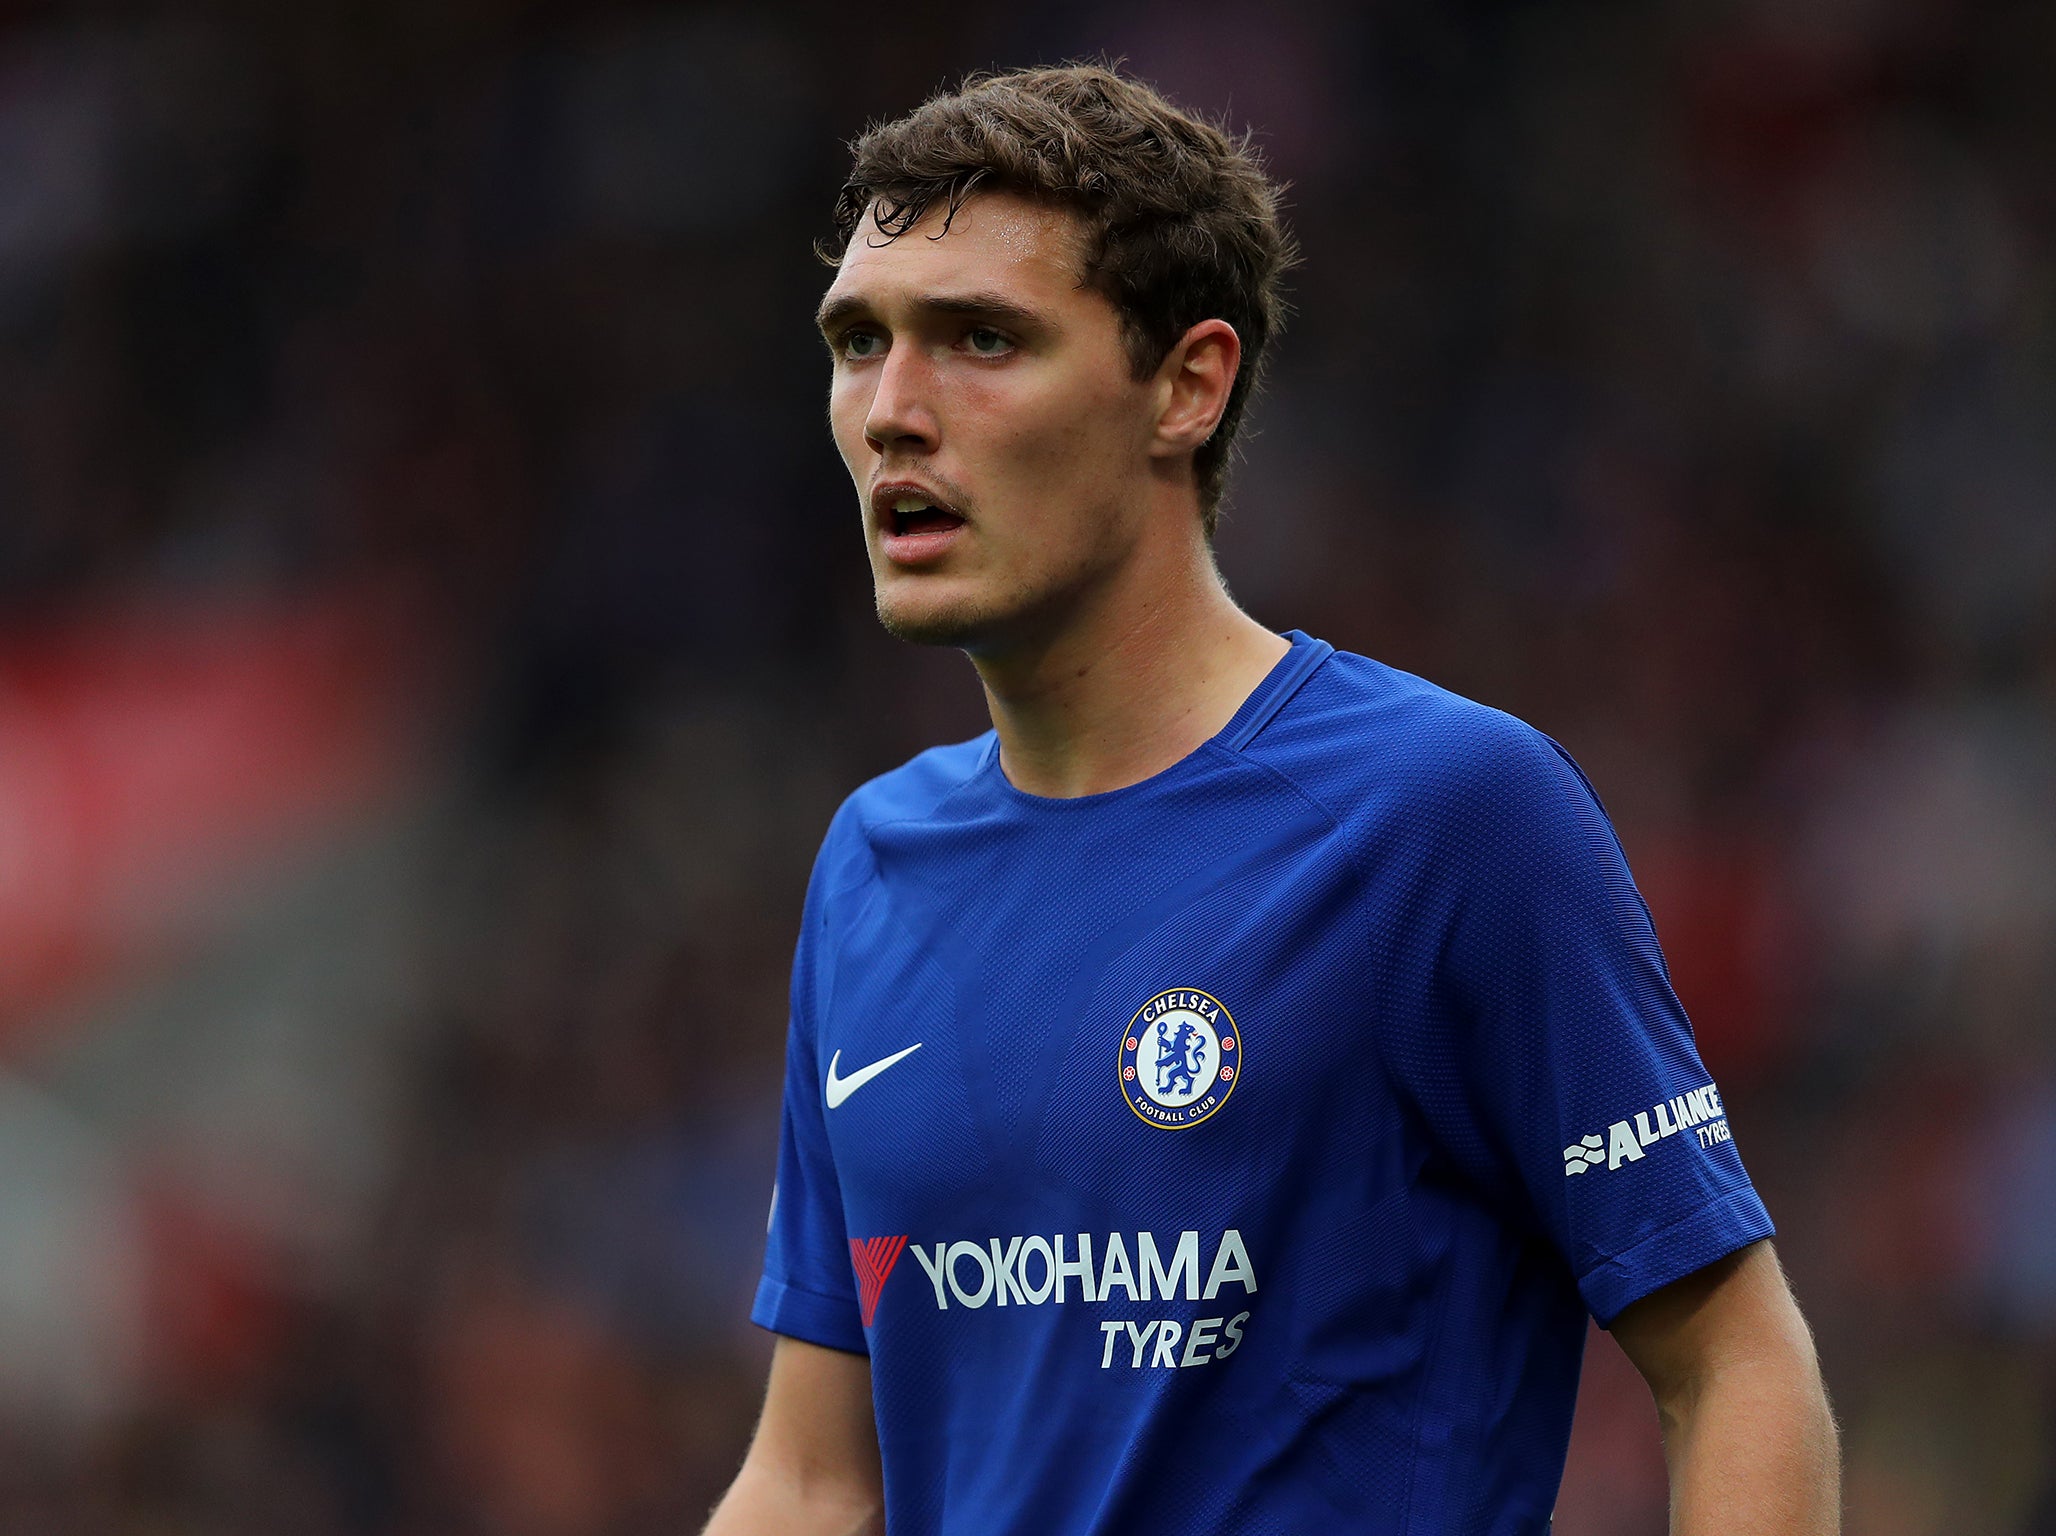 Christensen has slotted into Chelsea's first-team this season